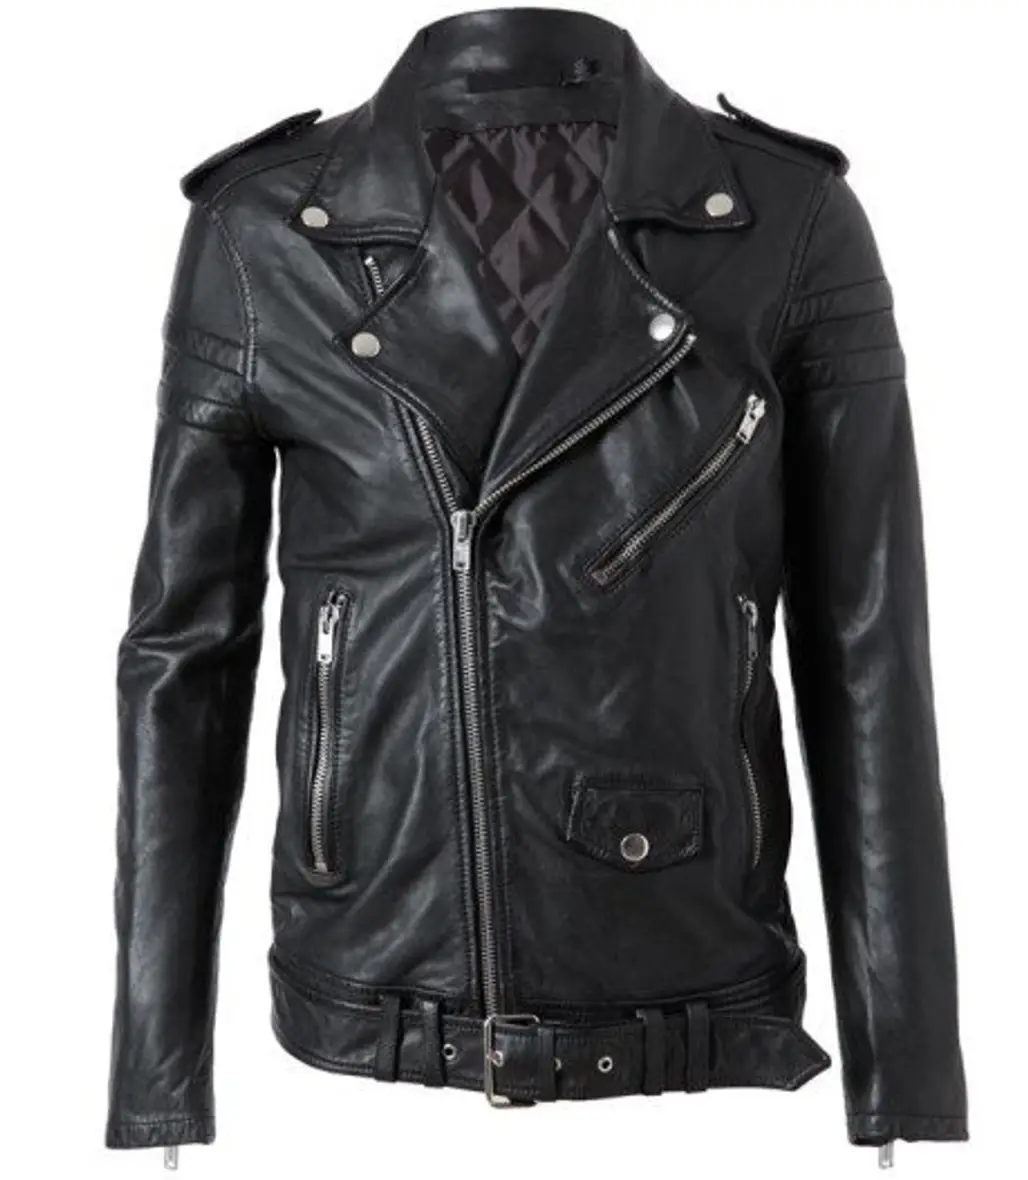 BLK DNM Leather Motorcycle Jacket